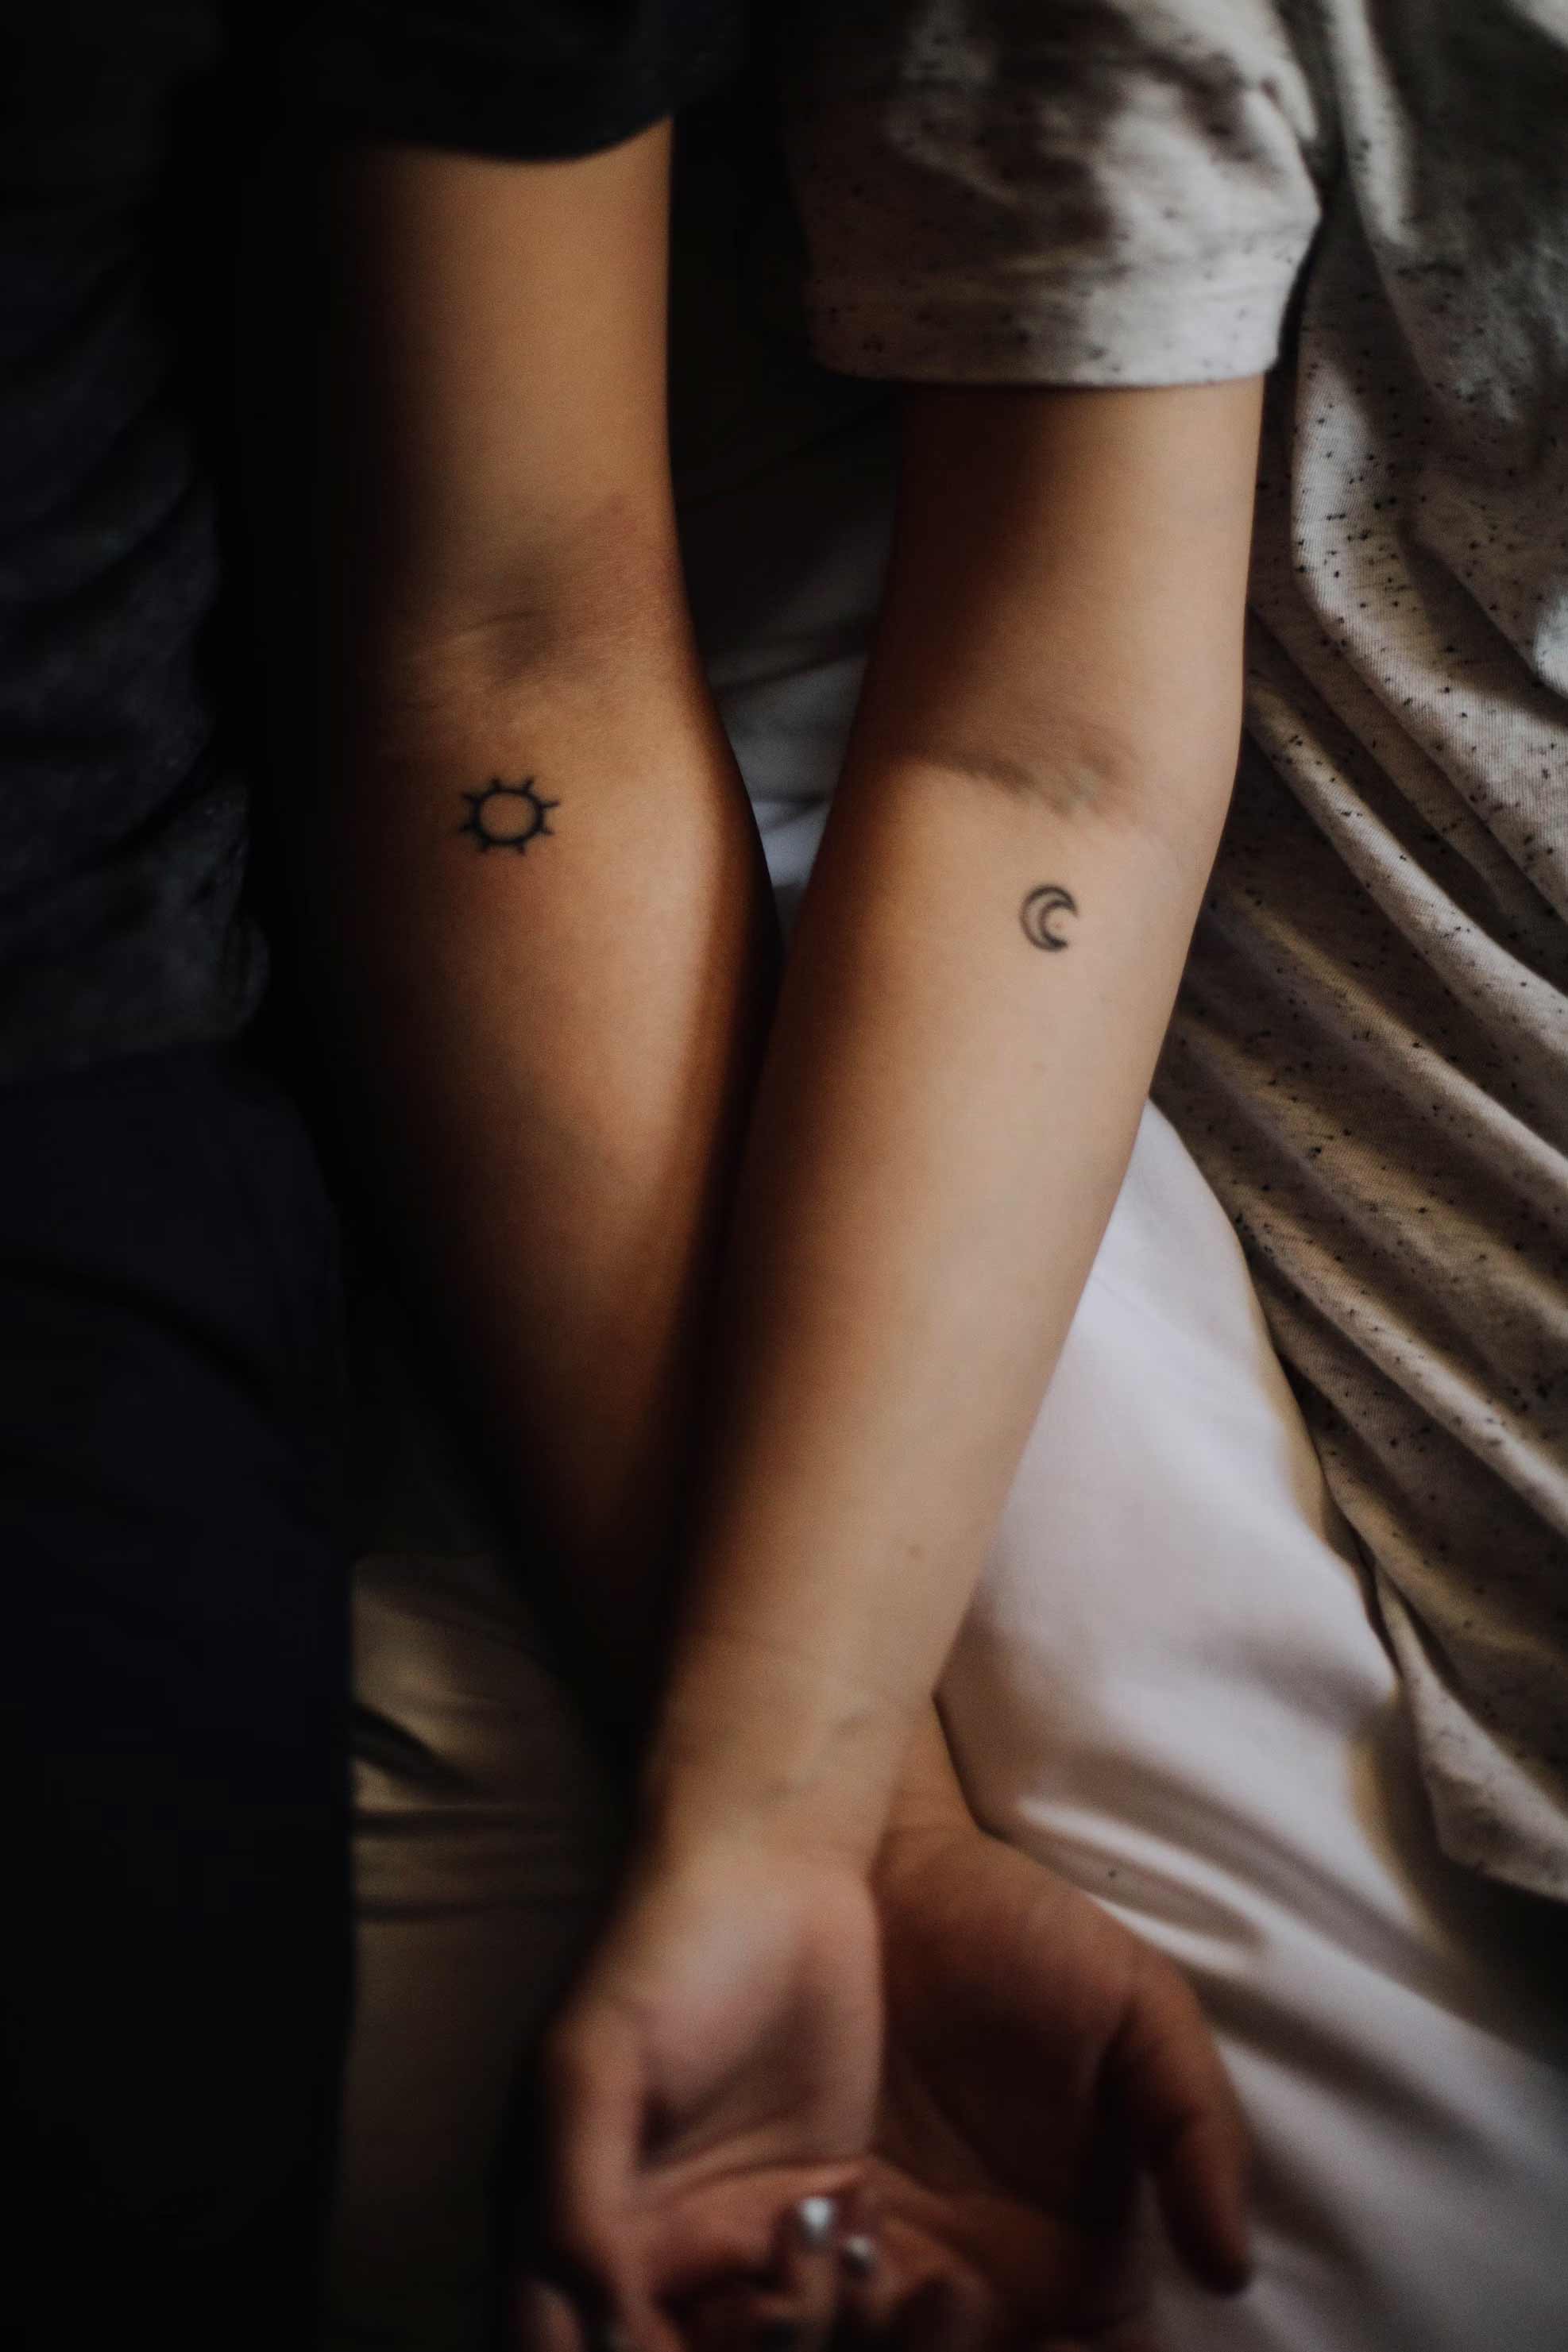 Dotwork style: what is a minimalist tattoo ?